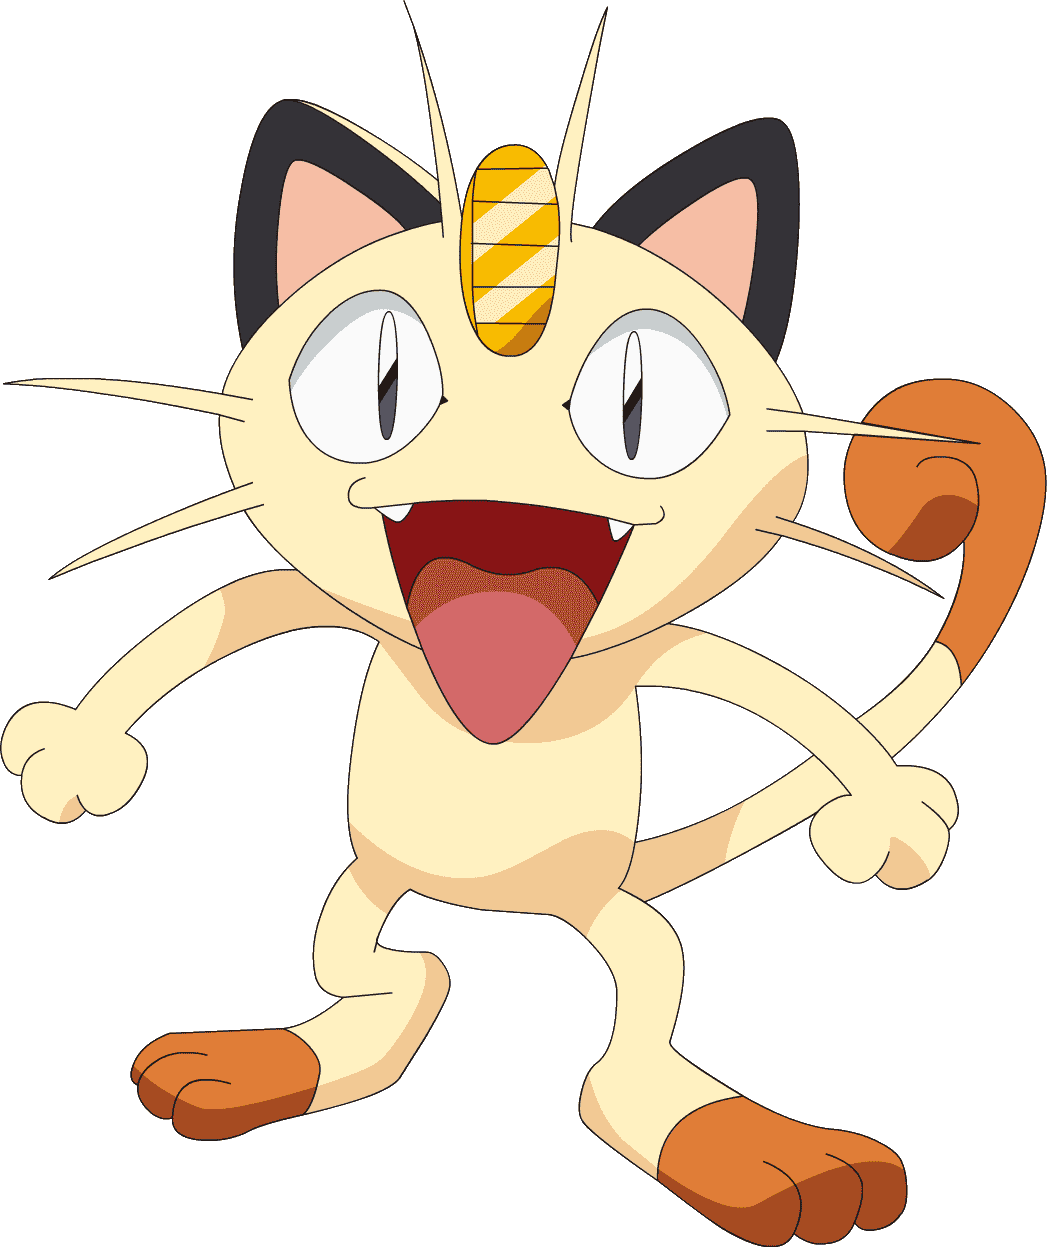 Meowth_Based_On.png